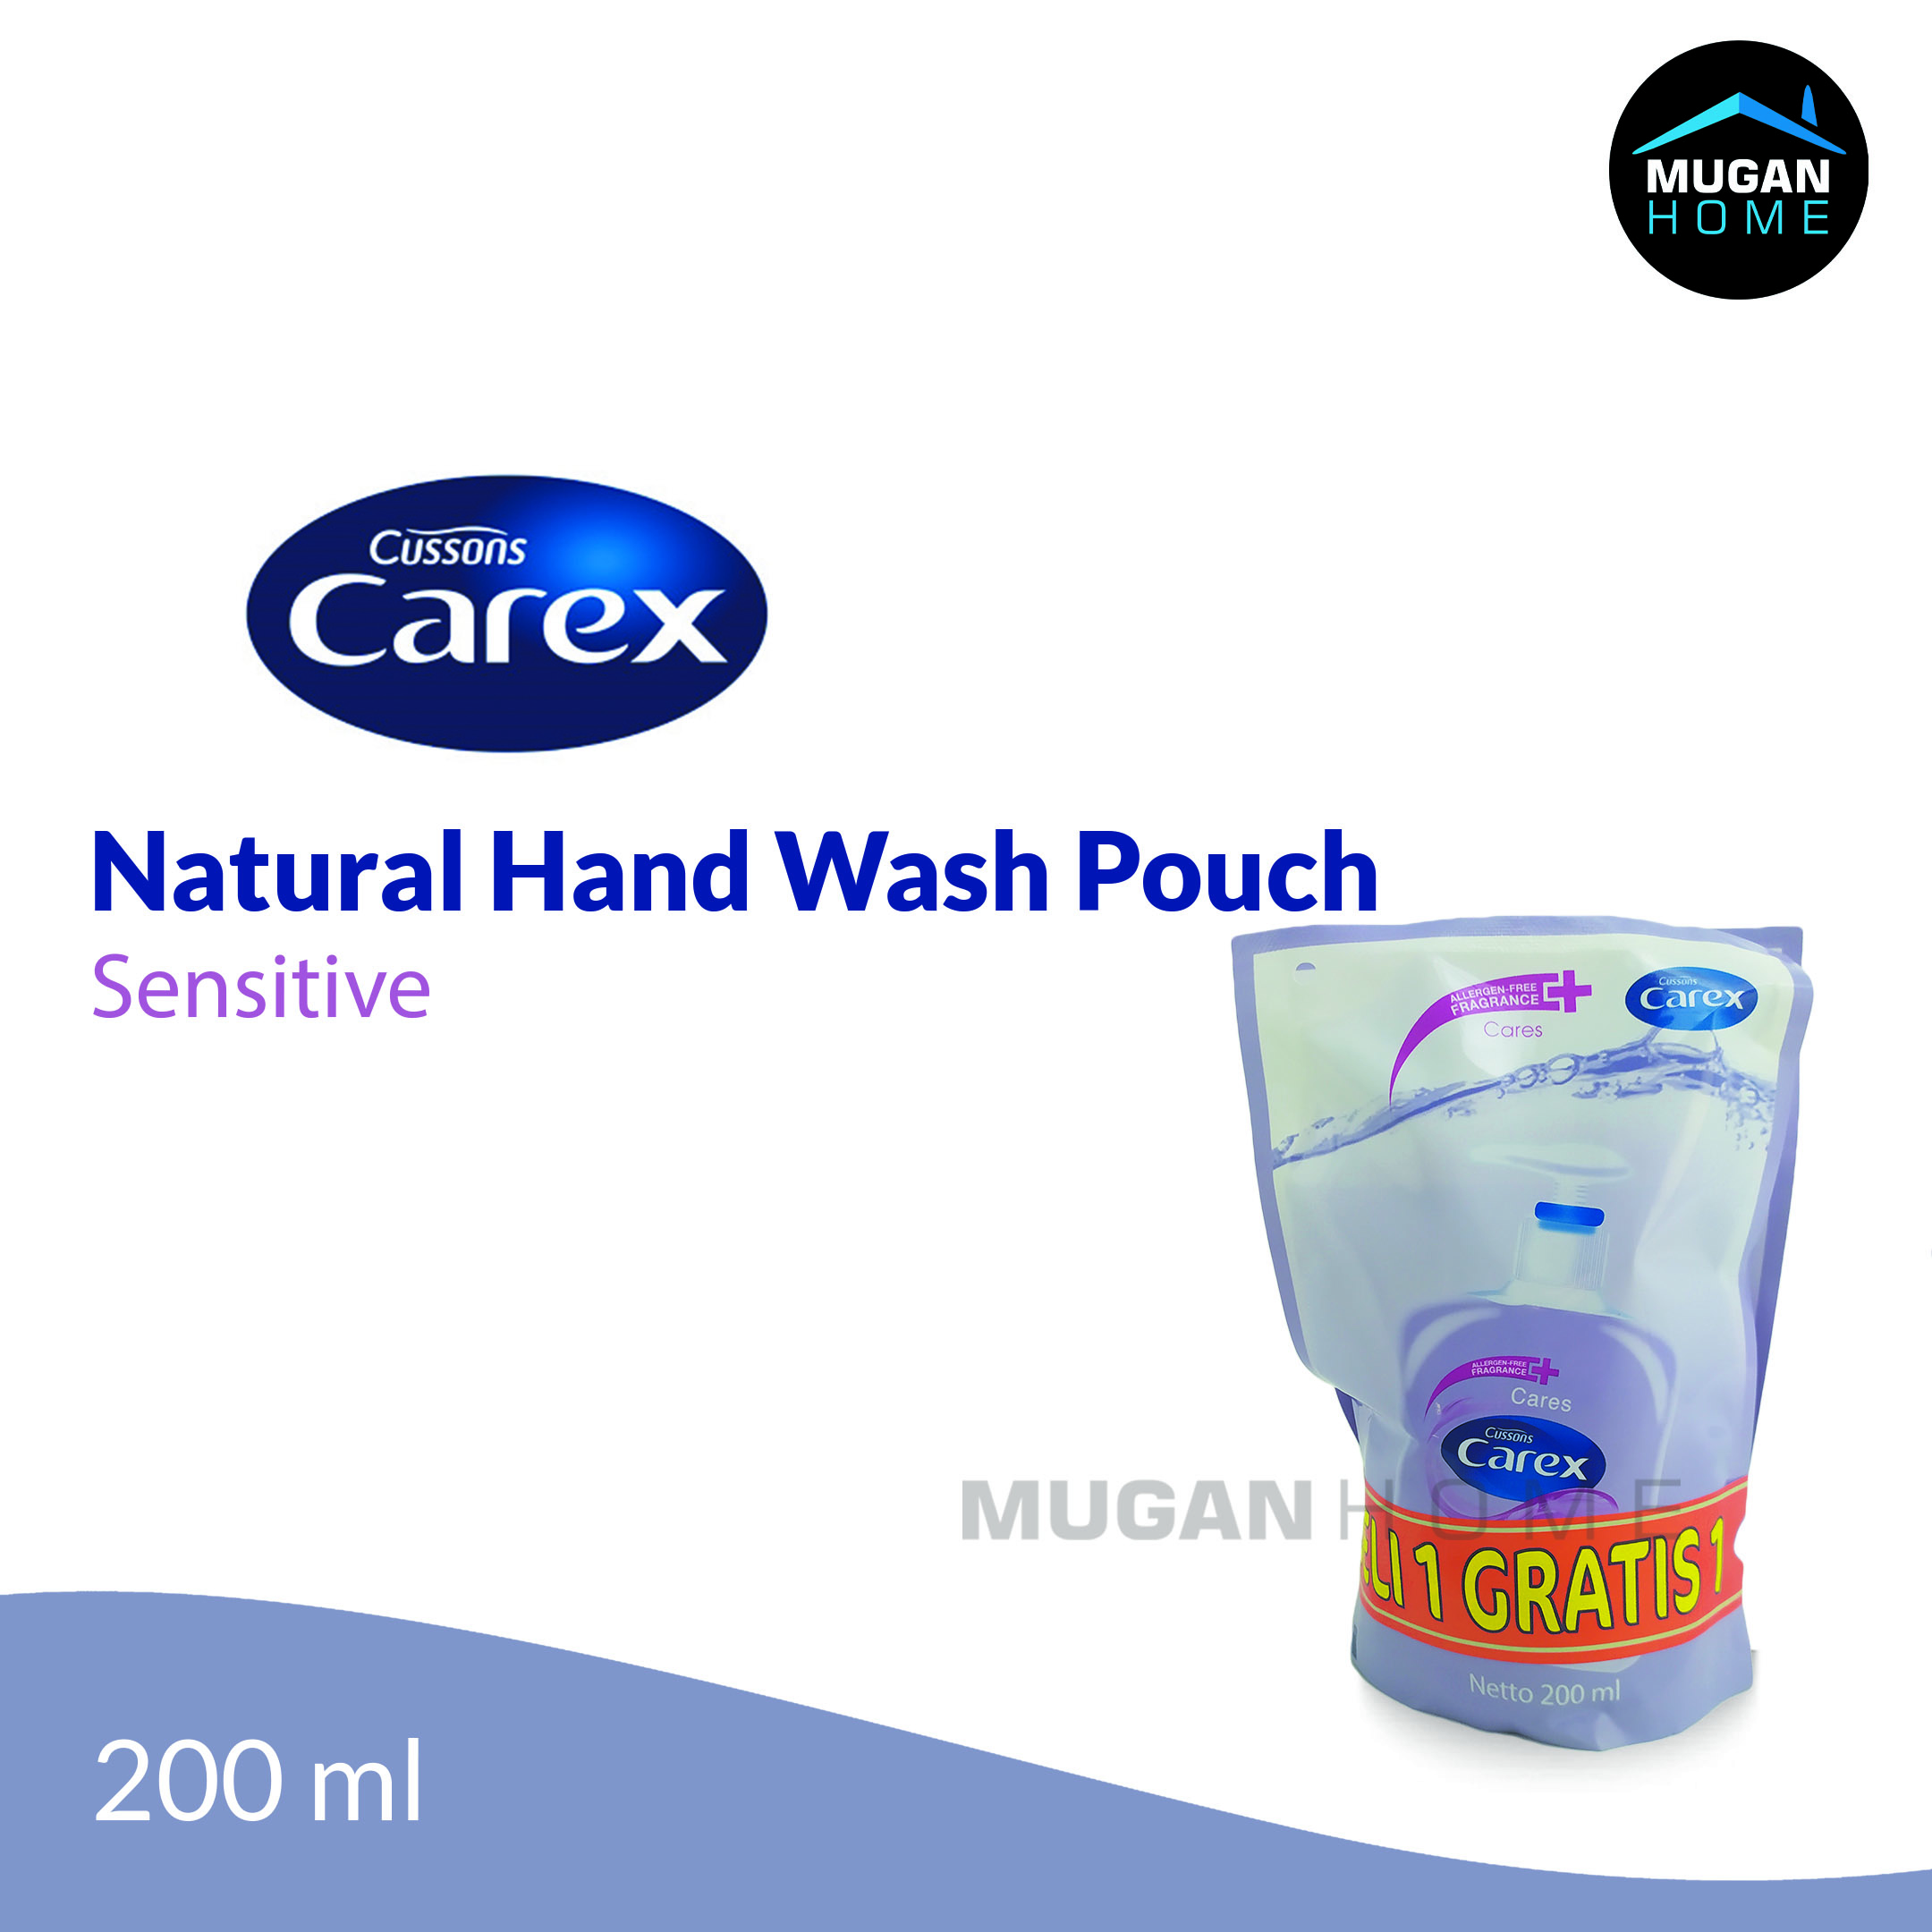 CUSSONS CAREX NATURAL ANTIBACTERIAL HAND WASH 200ML SENSITIVE POUCH BUY 1 GET 1